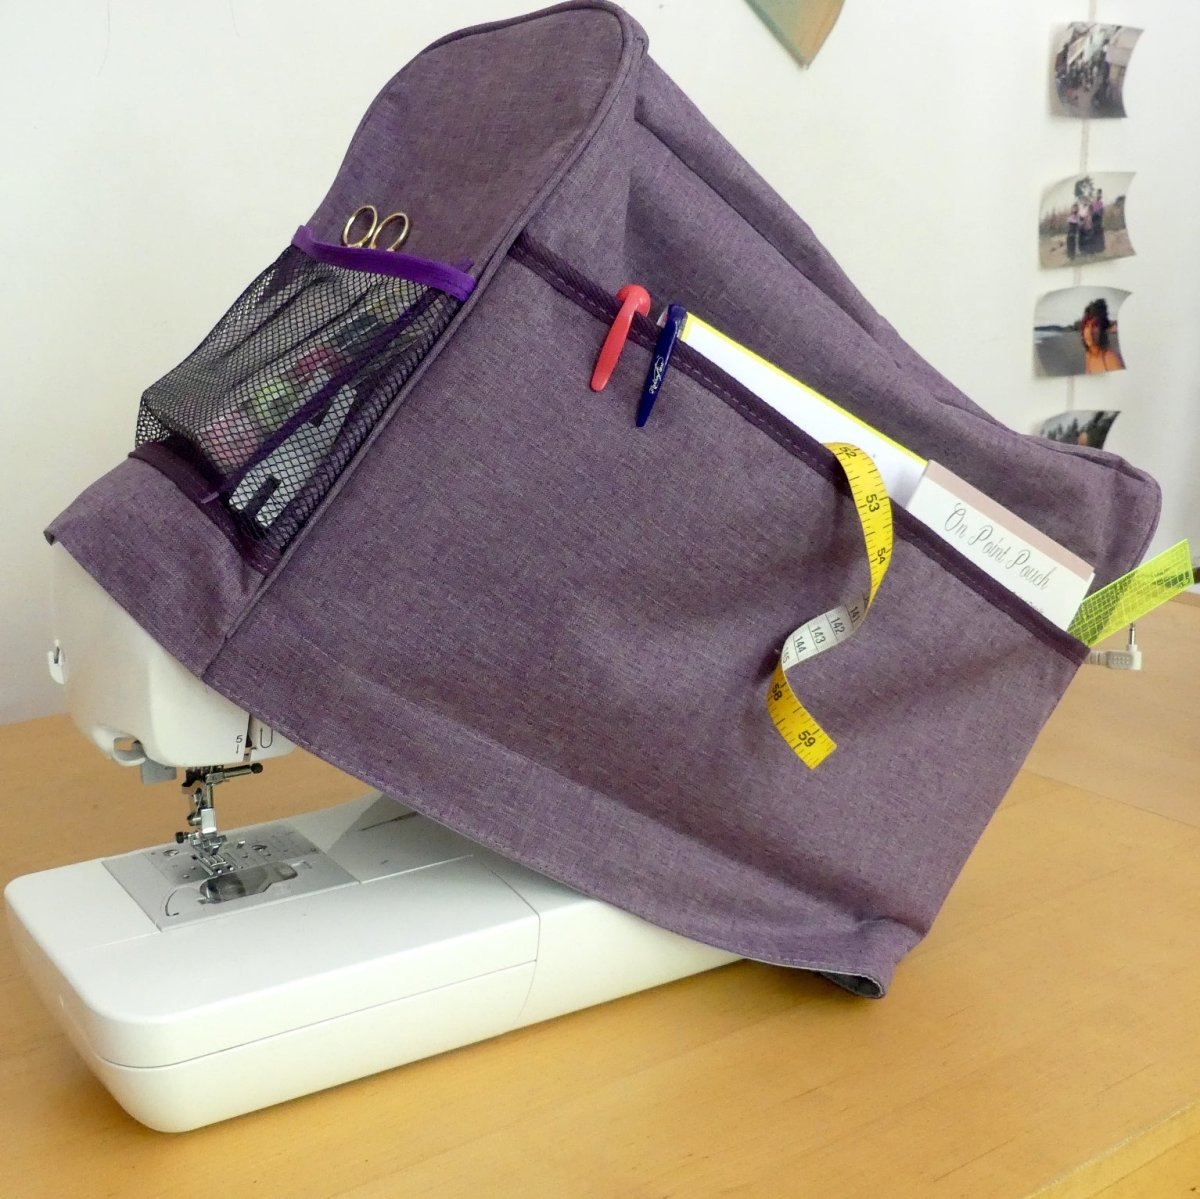  CURMIO Sewing Machine Cover with Pockets, Dust Cover